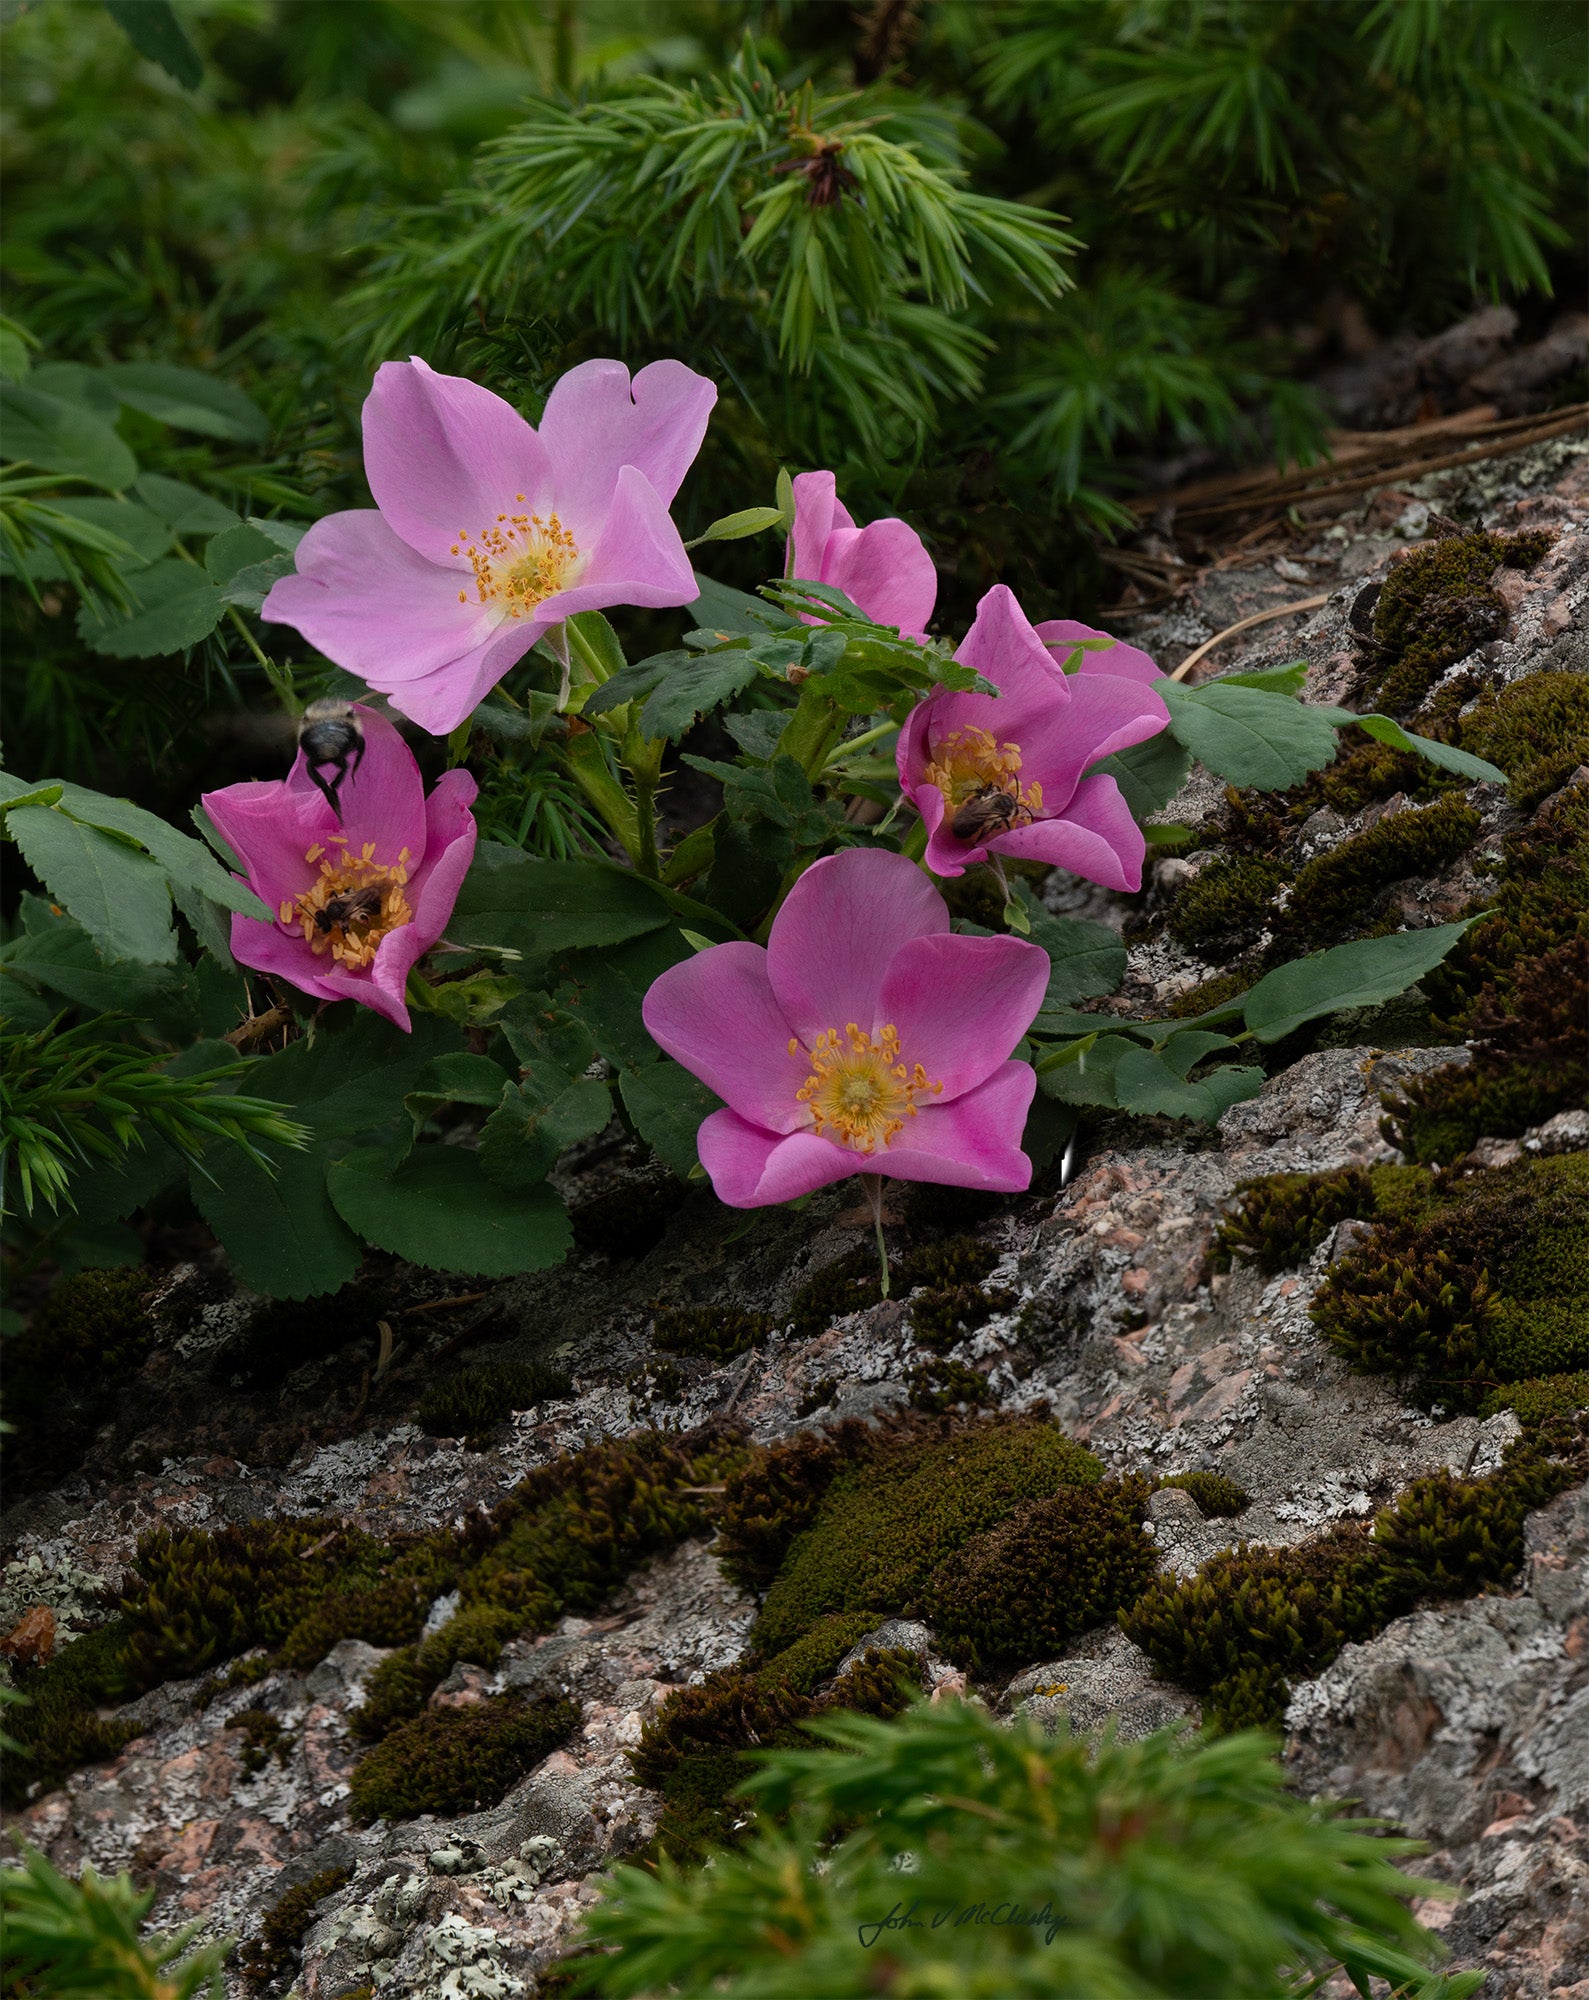 In this nature image, a cluster of pink wild roses bloom, attended by bees, and framed by foliage and a textured granite rock.